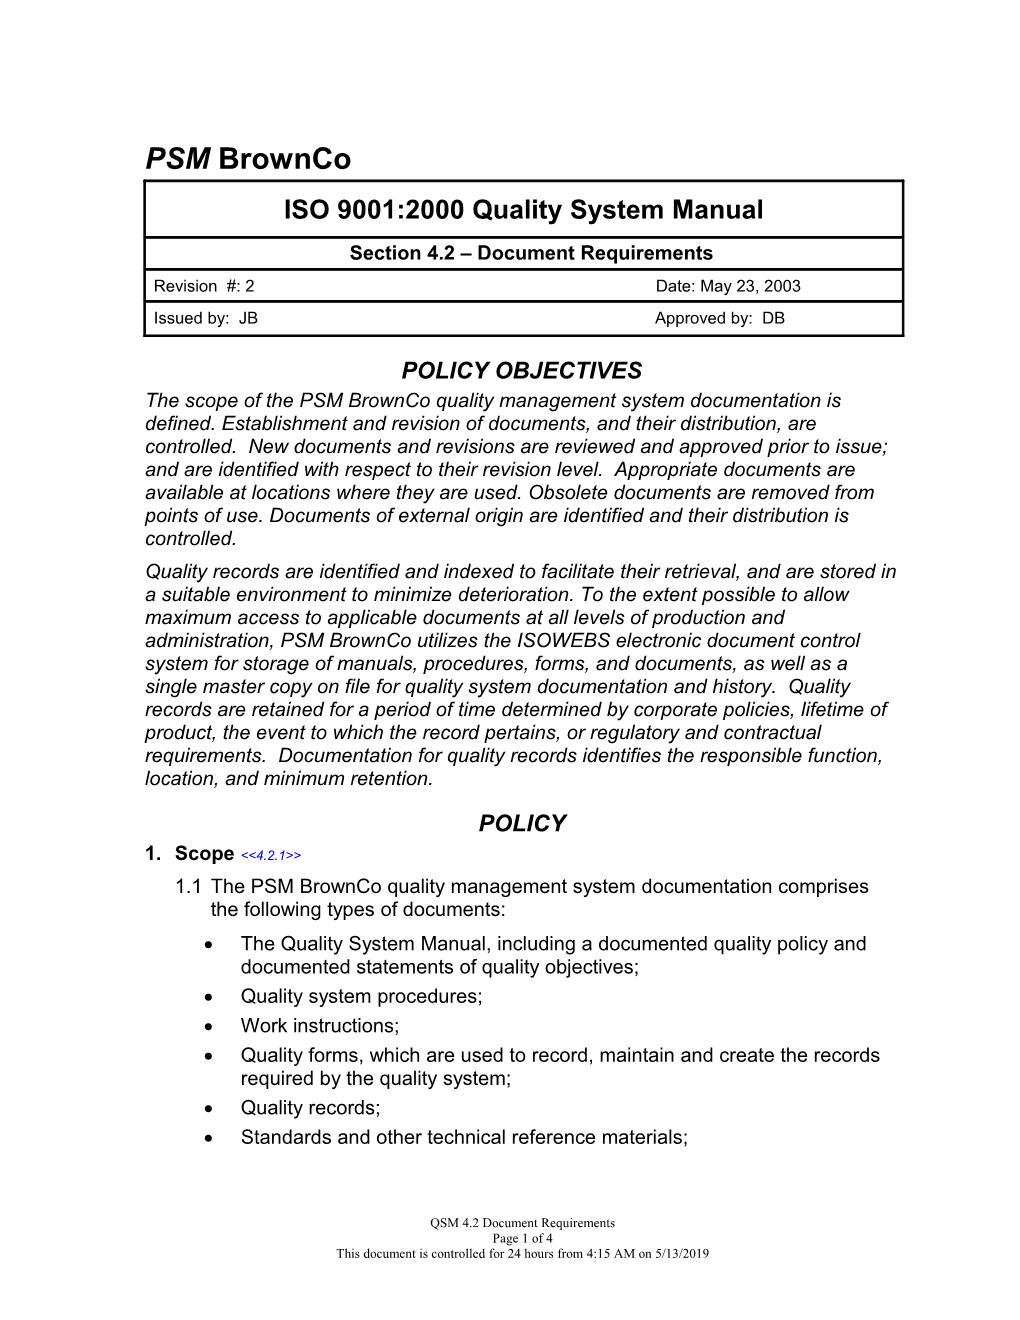 ISO 9001:2000 Quality System Manual